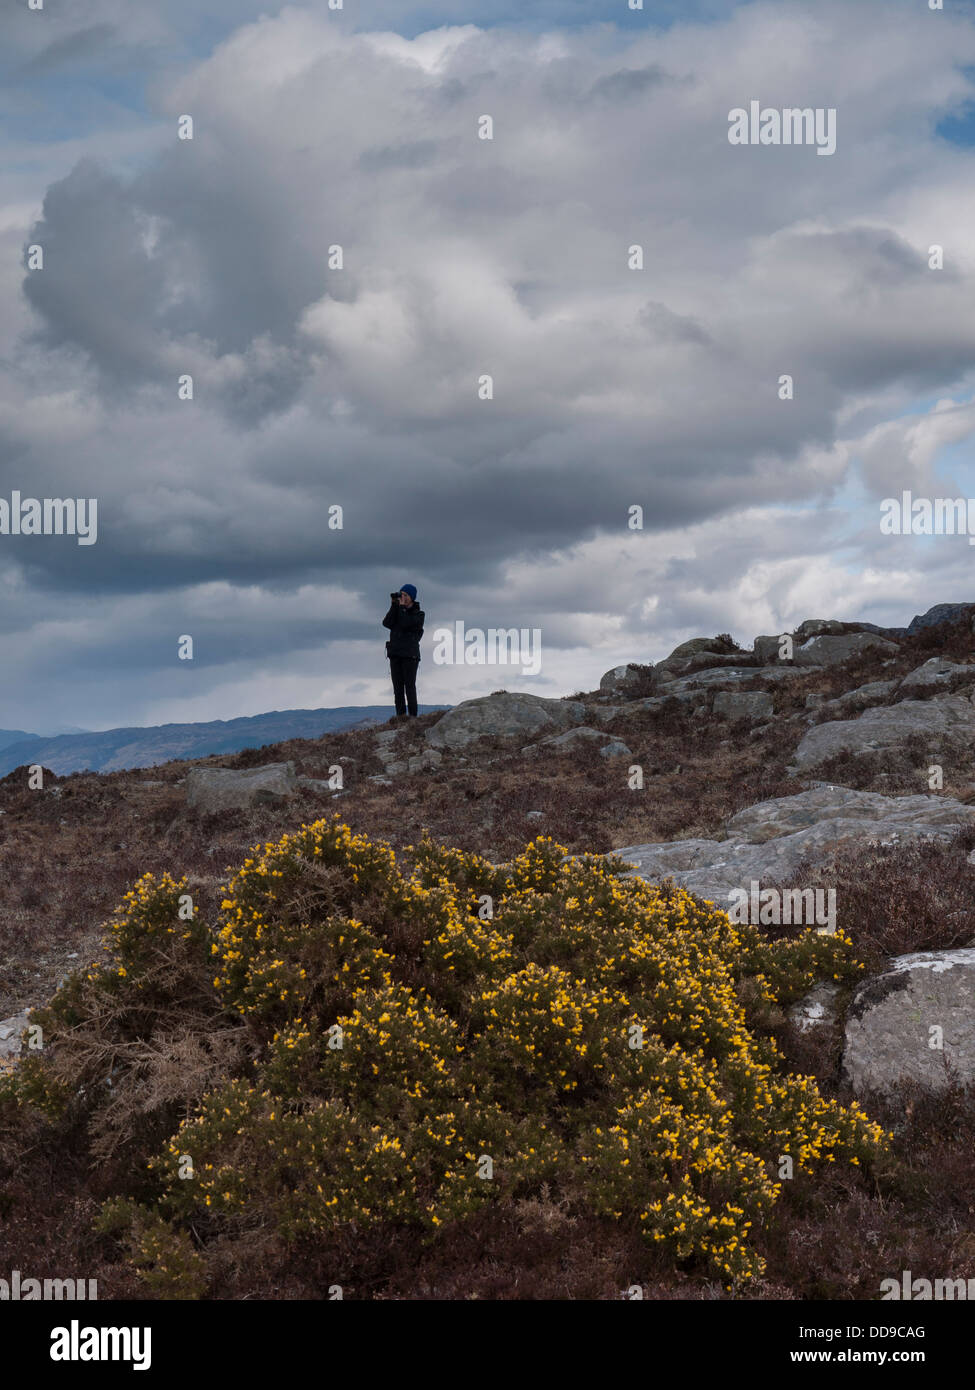 Cloud formations above person birdwatching in early spring at Plockton on the north west coast of Scotland, UK Stock Photo